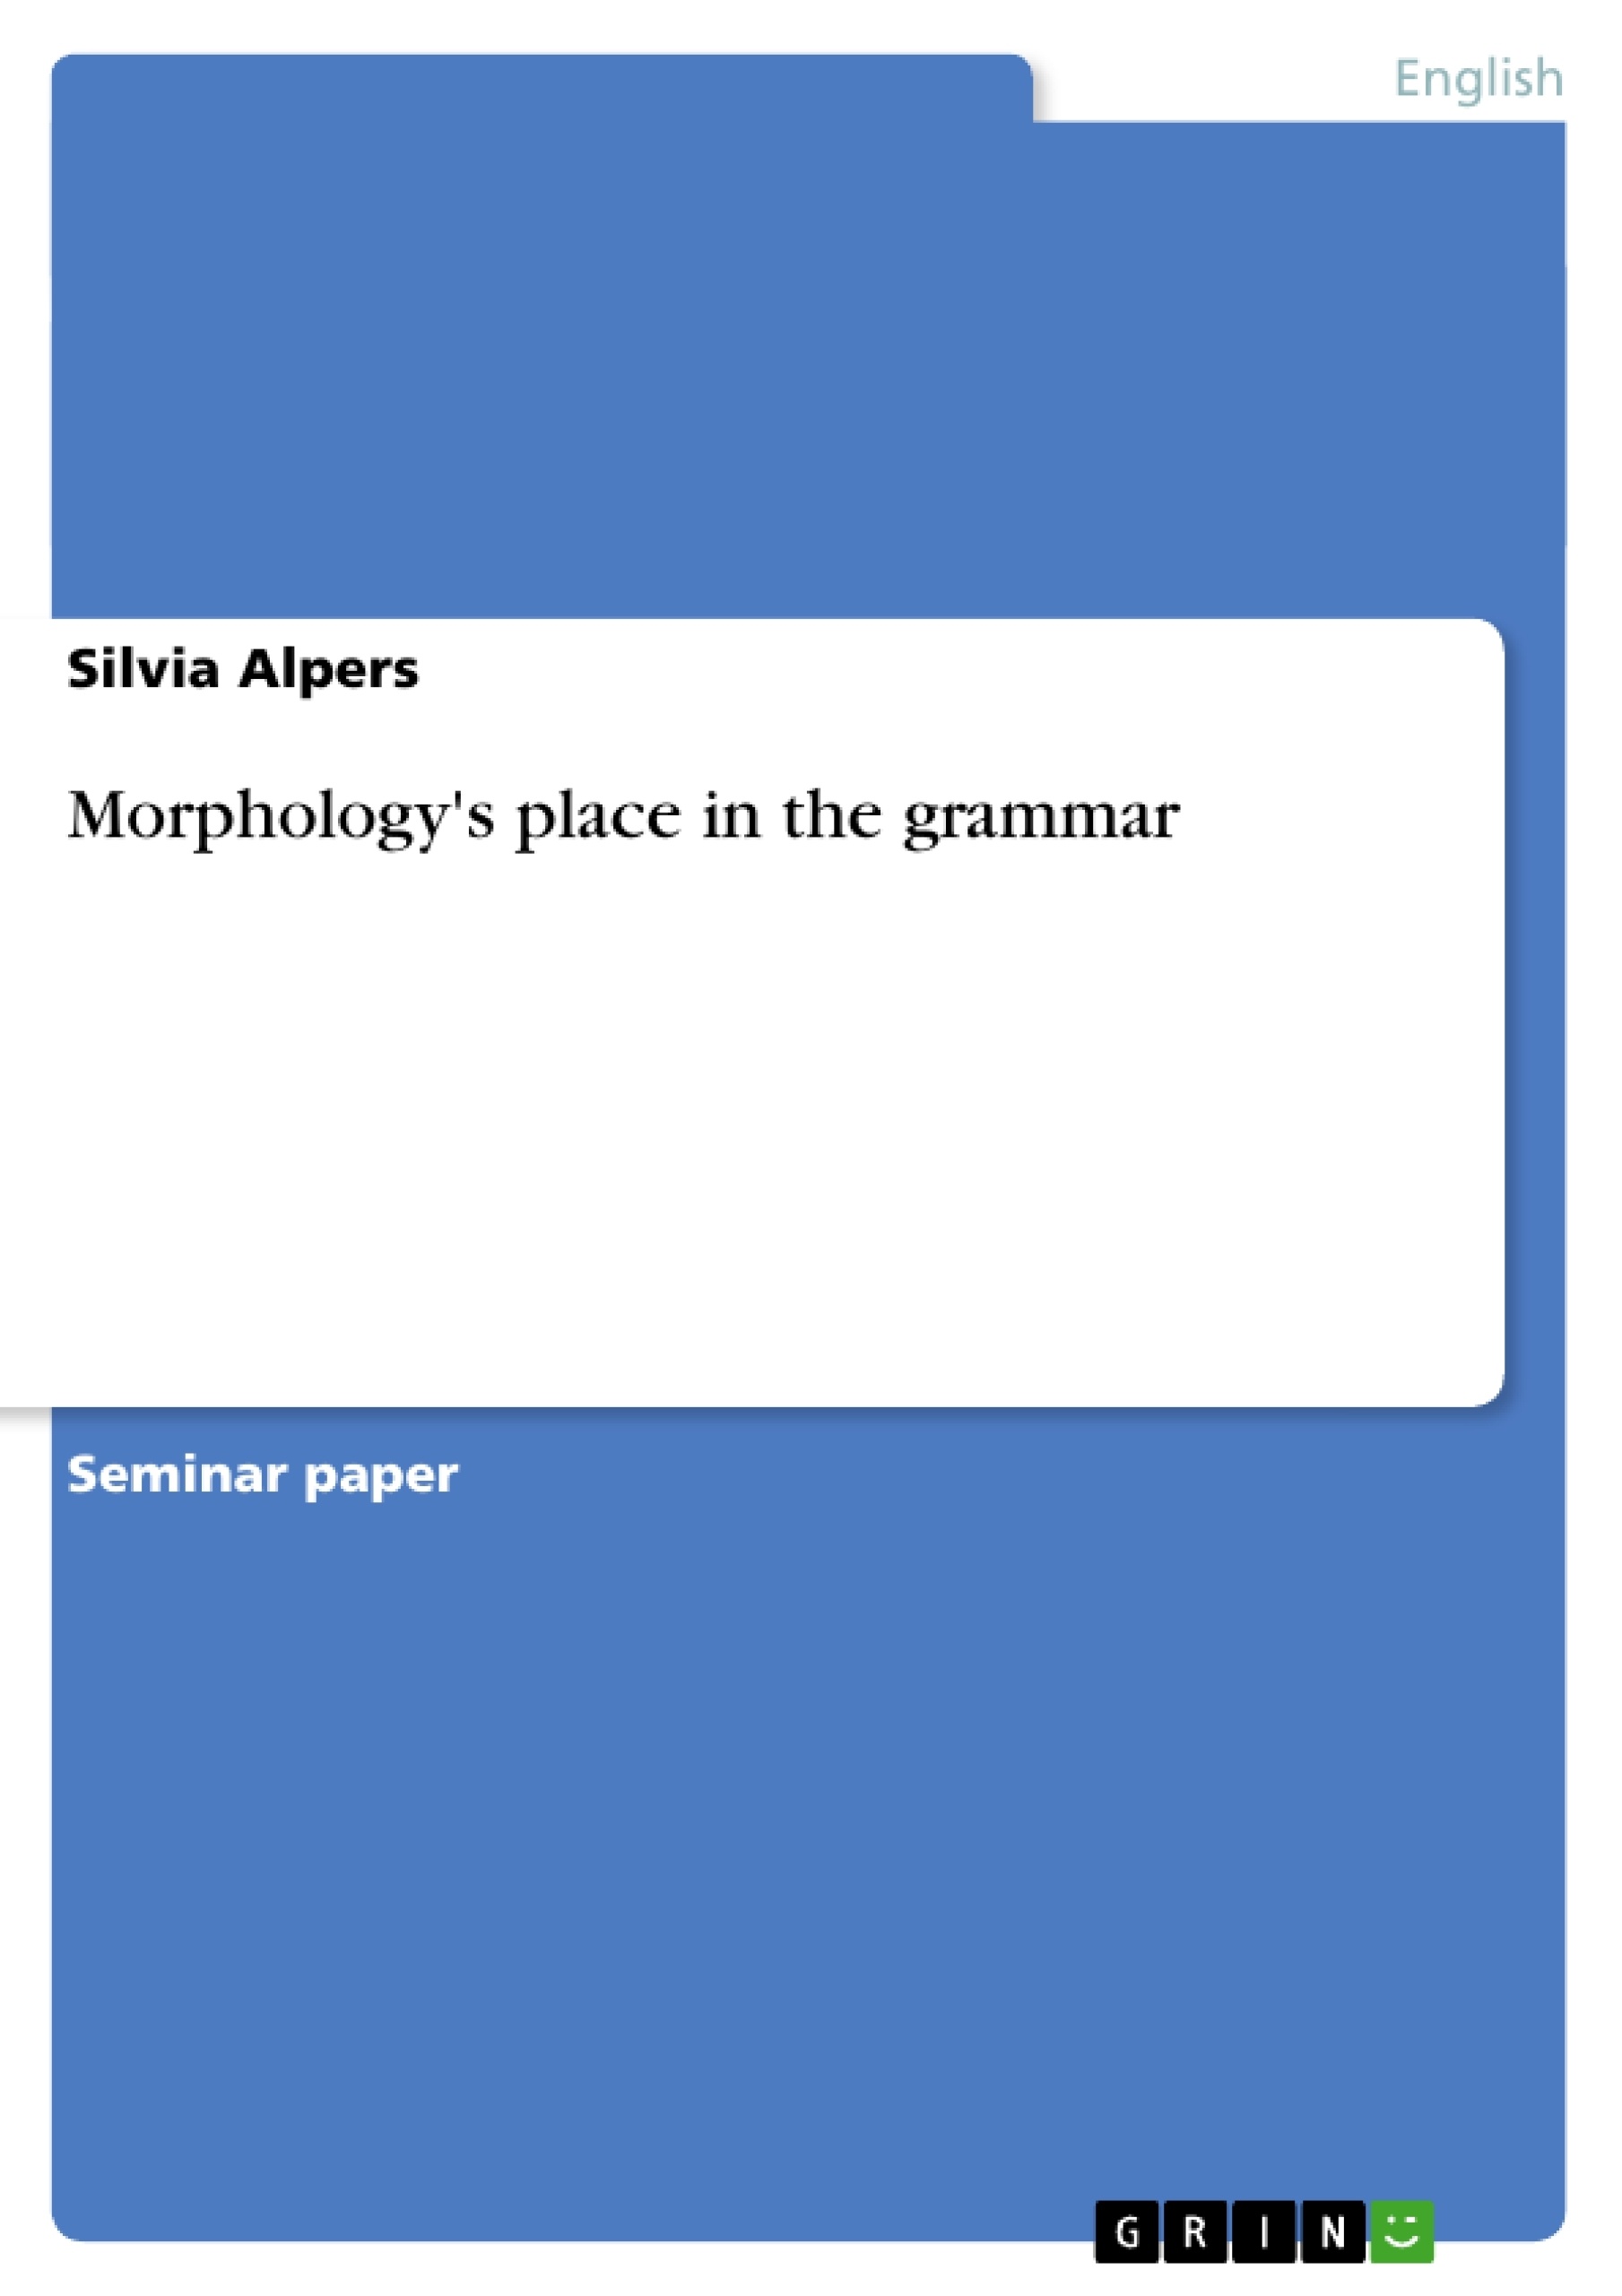 Título: Morphology's place in the grammar